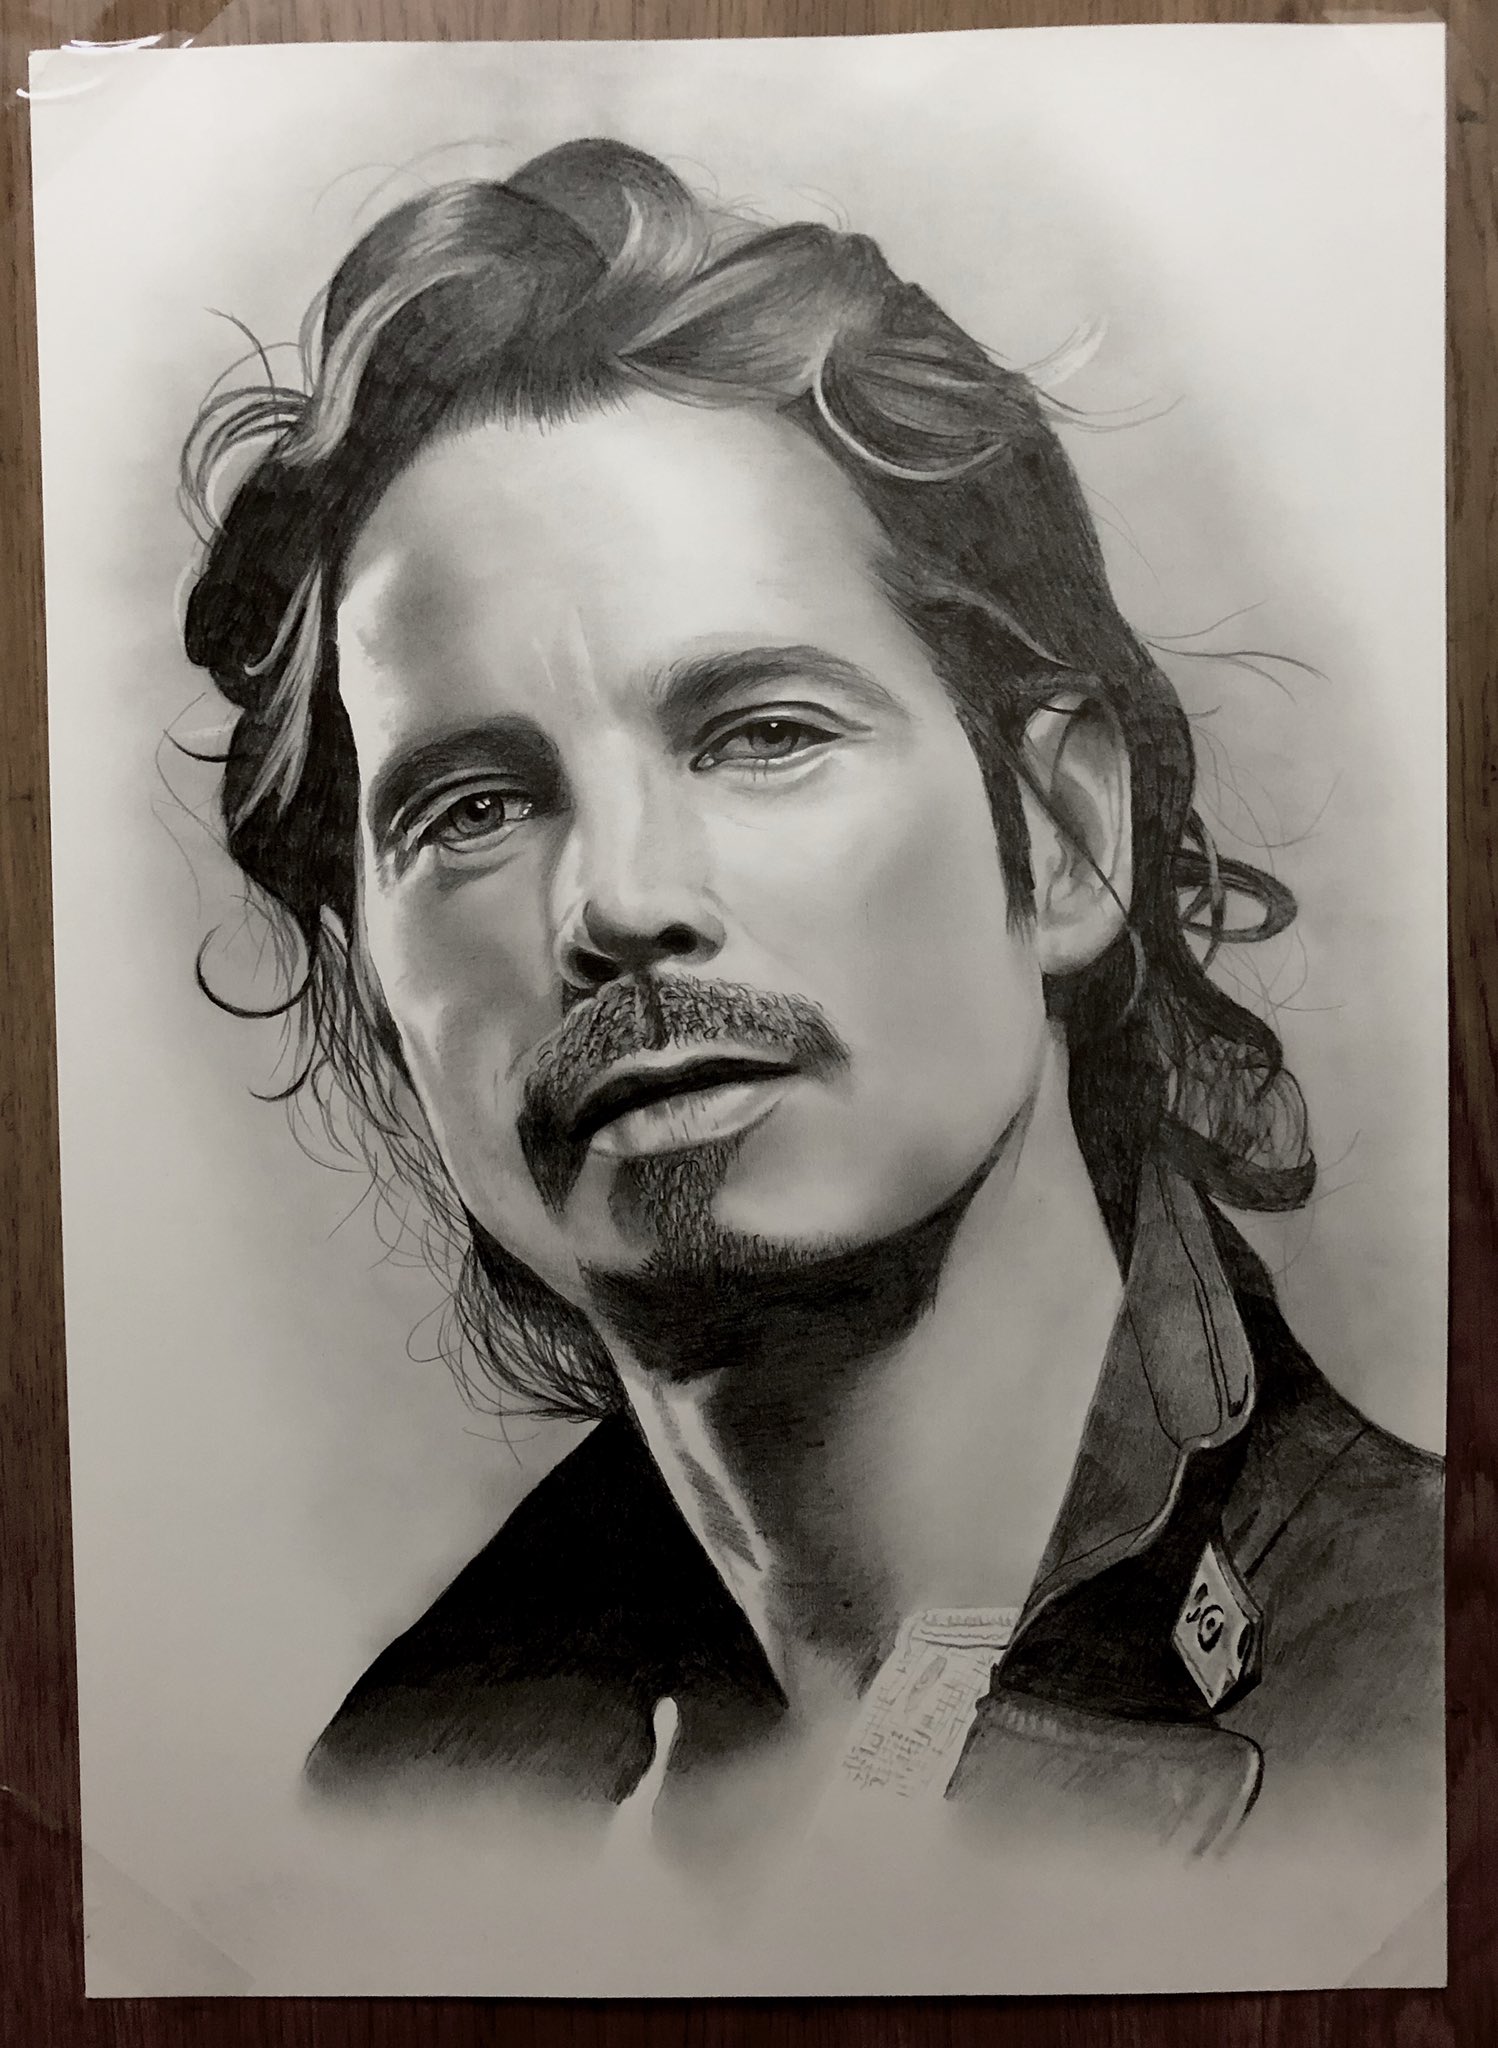 Portraits in Prose ink  A year ago today Chris Cornell passed away A  very sad day for music  This drawing is made of audioslave and  soundgarden song lyrics as well